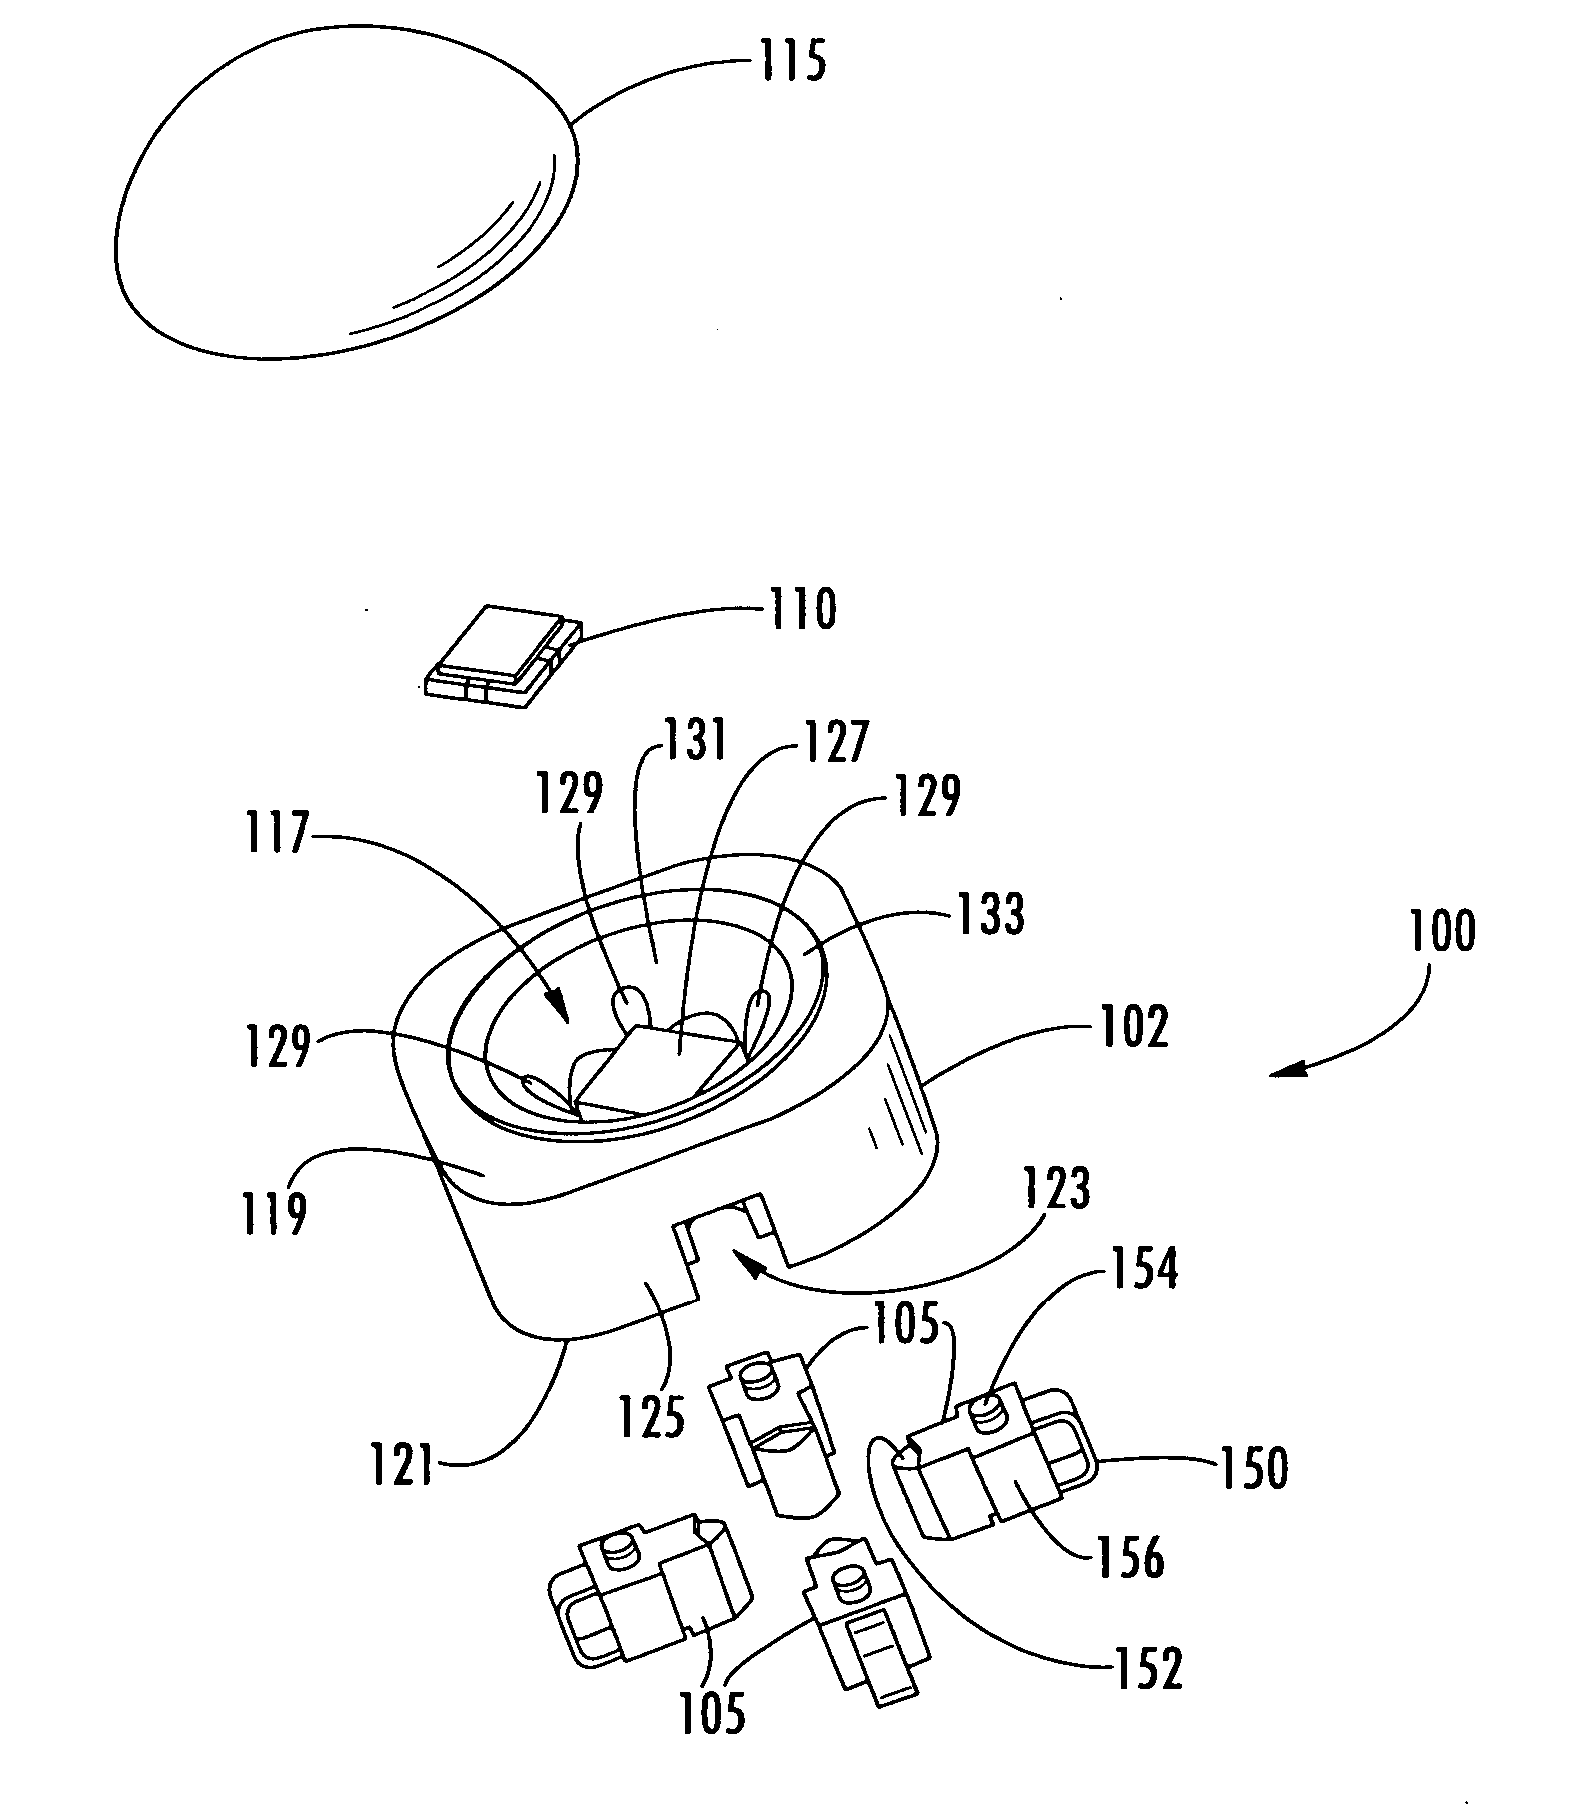 Semiconductor light emitting device mounting substrates including a conductive lead extending therein and methods of packaging same